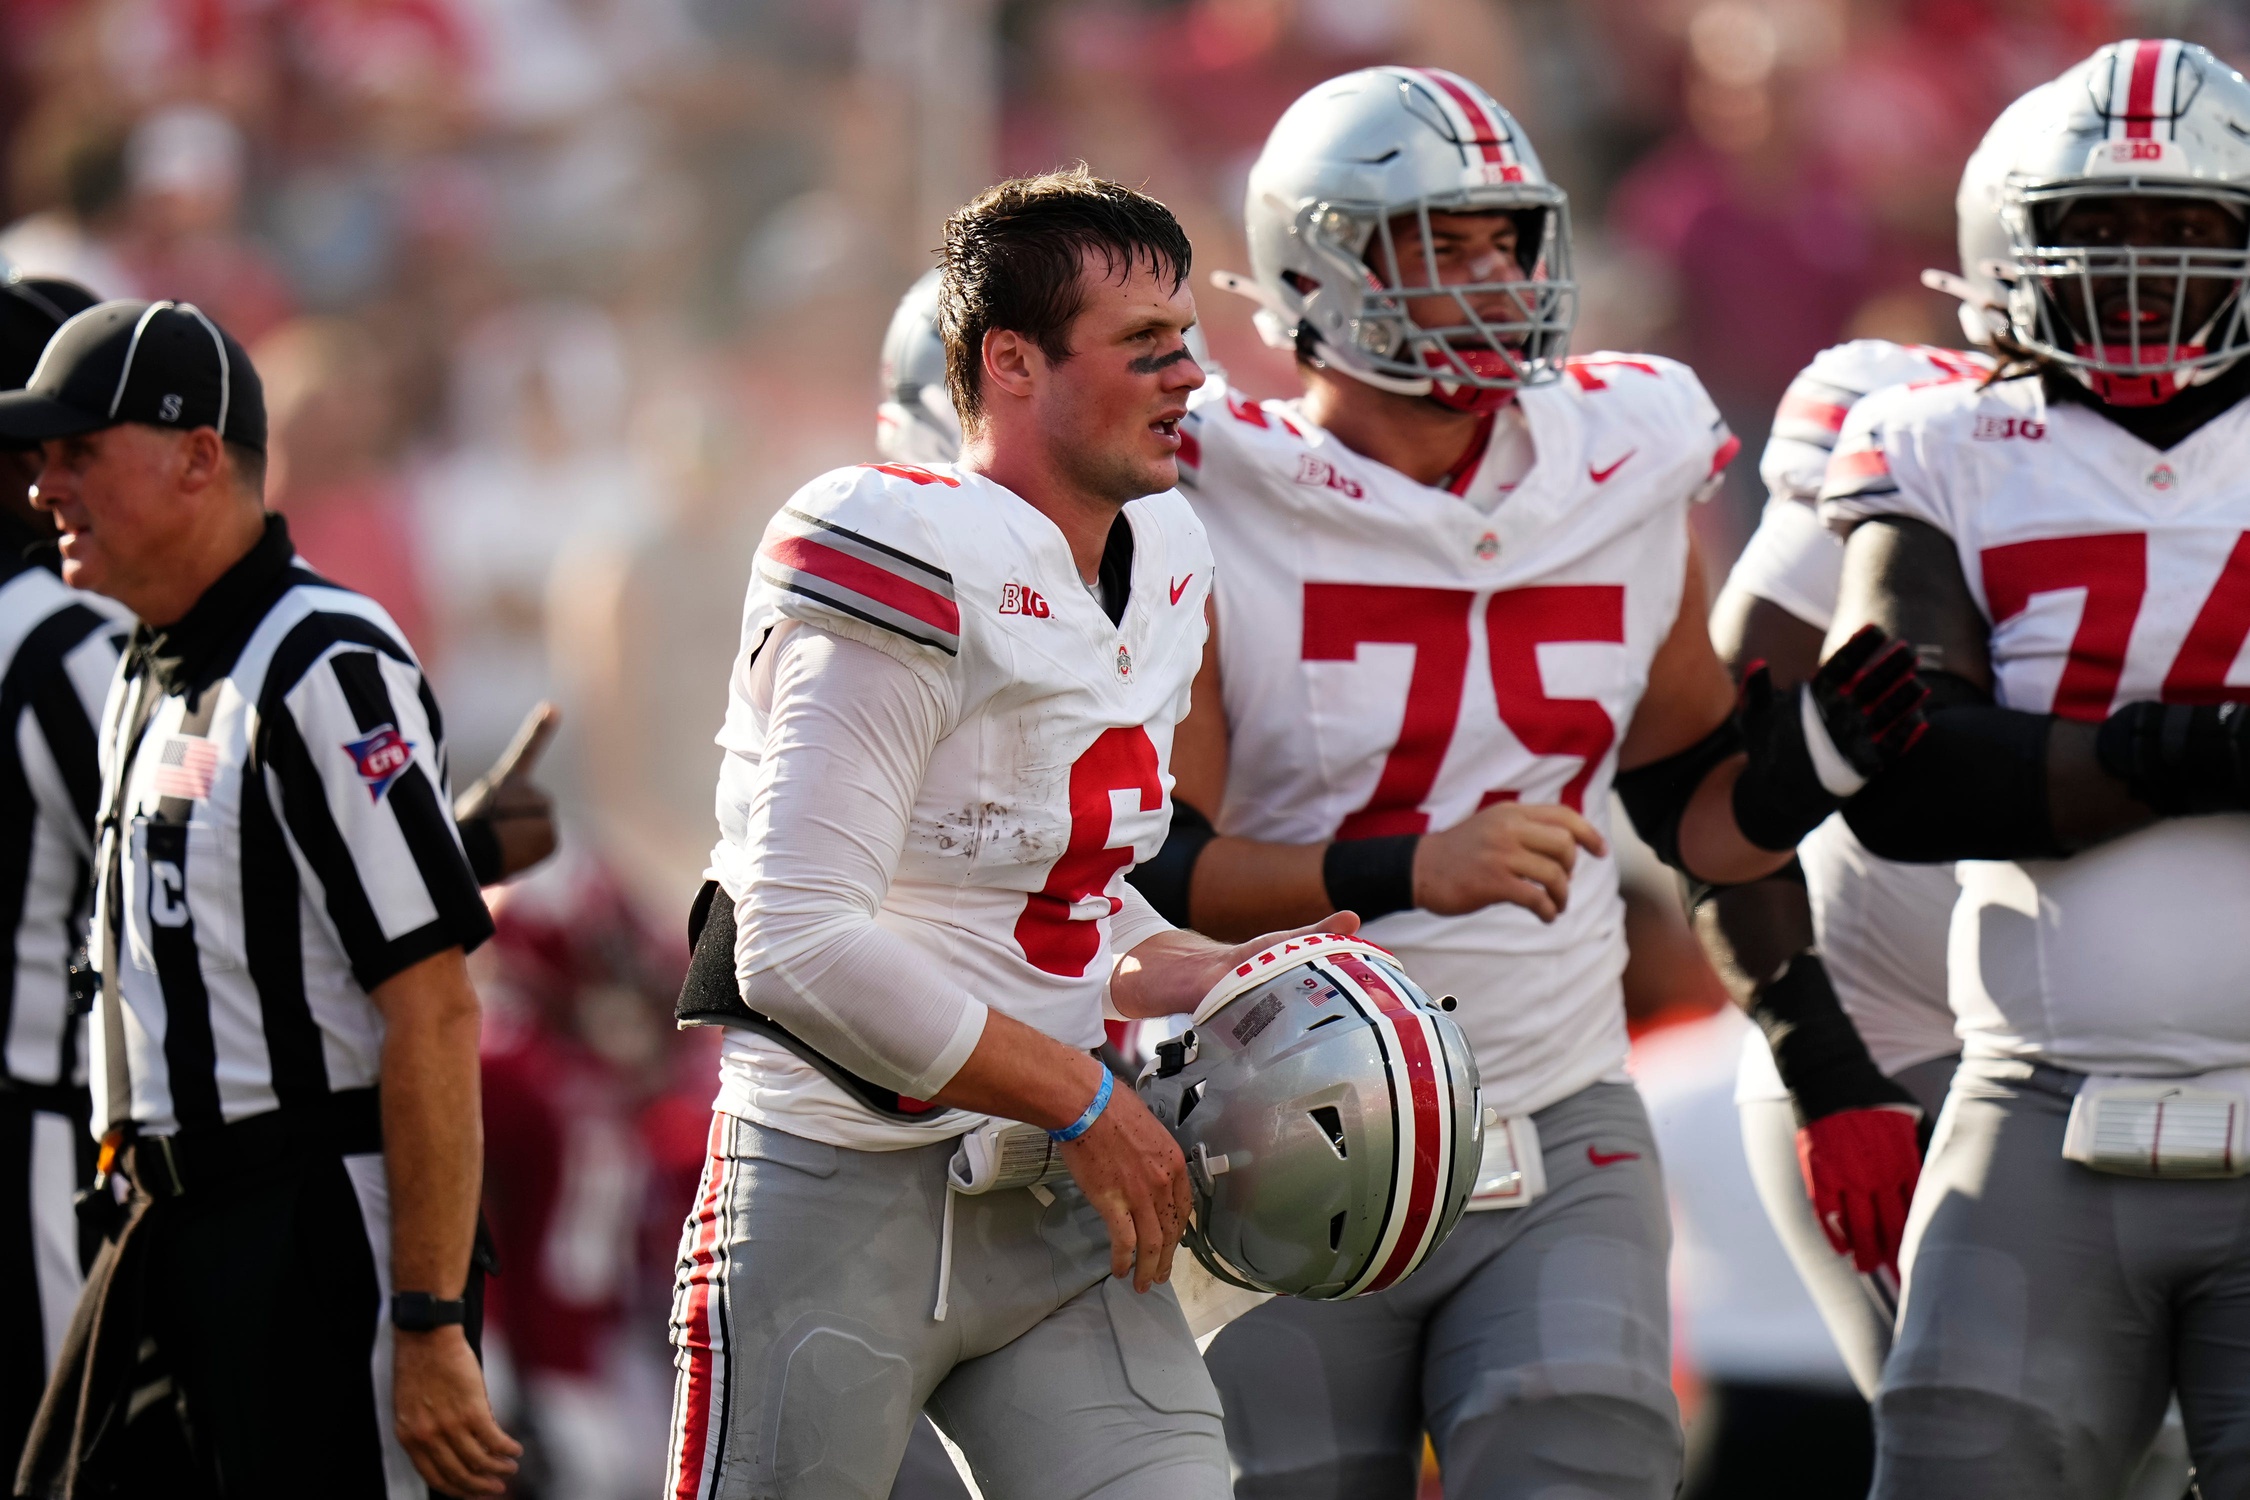 Ohio State's Win Over Indiana Was Uninspiring, Leaves Questions